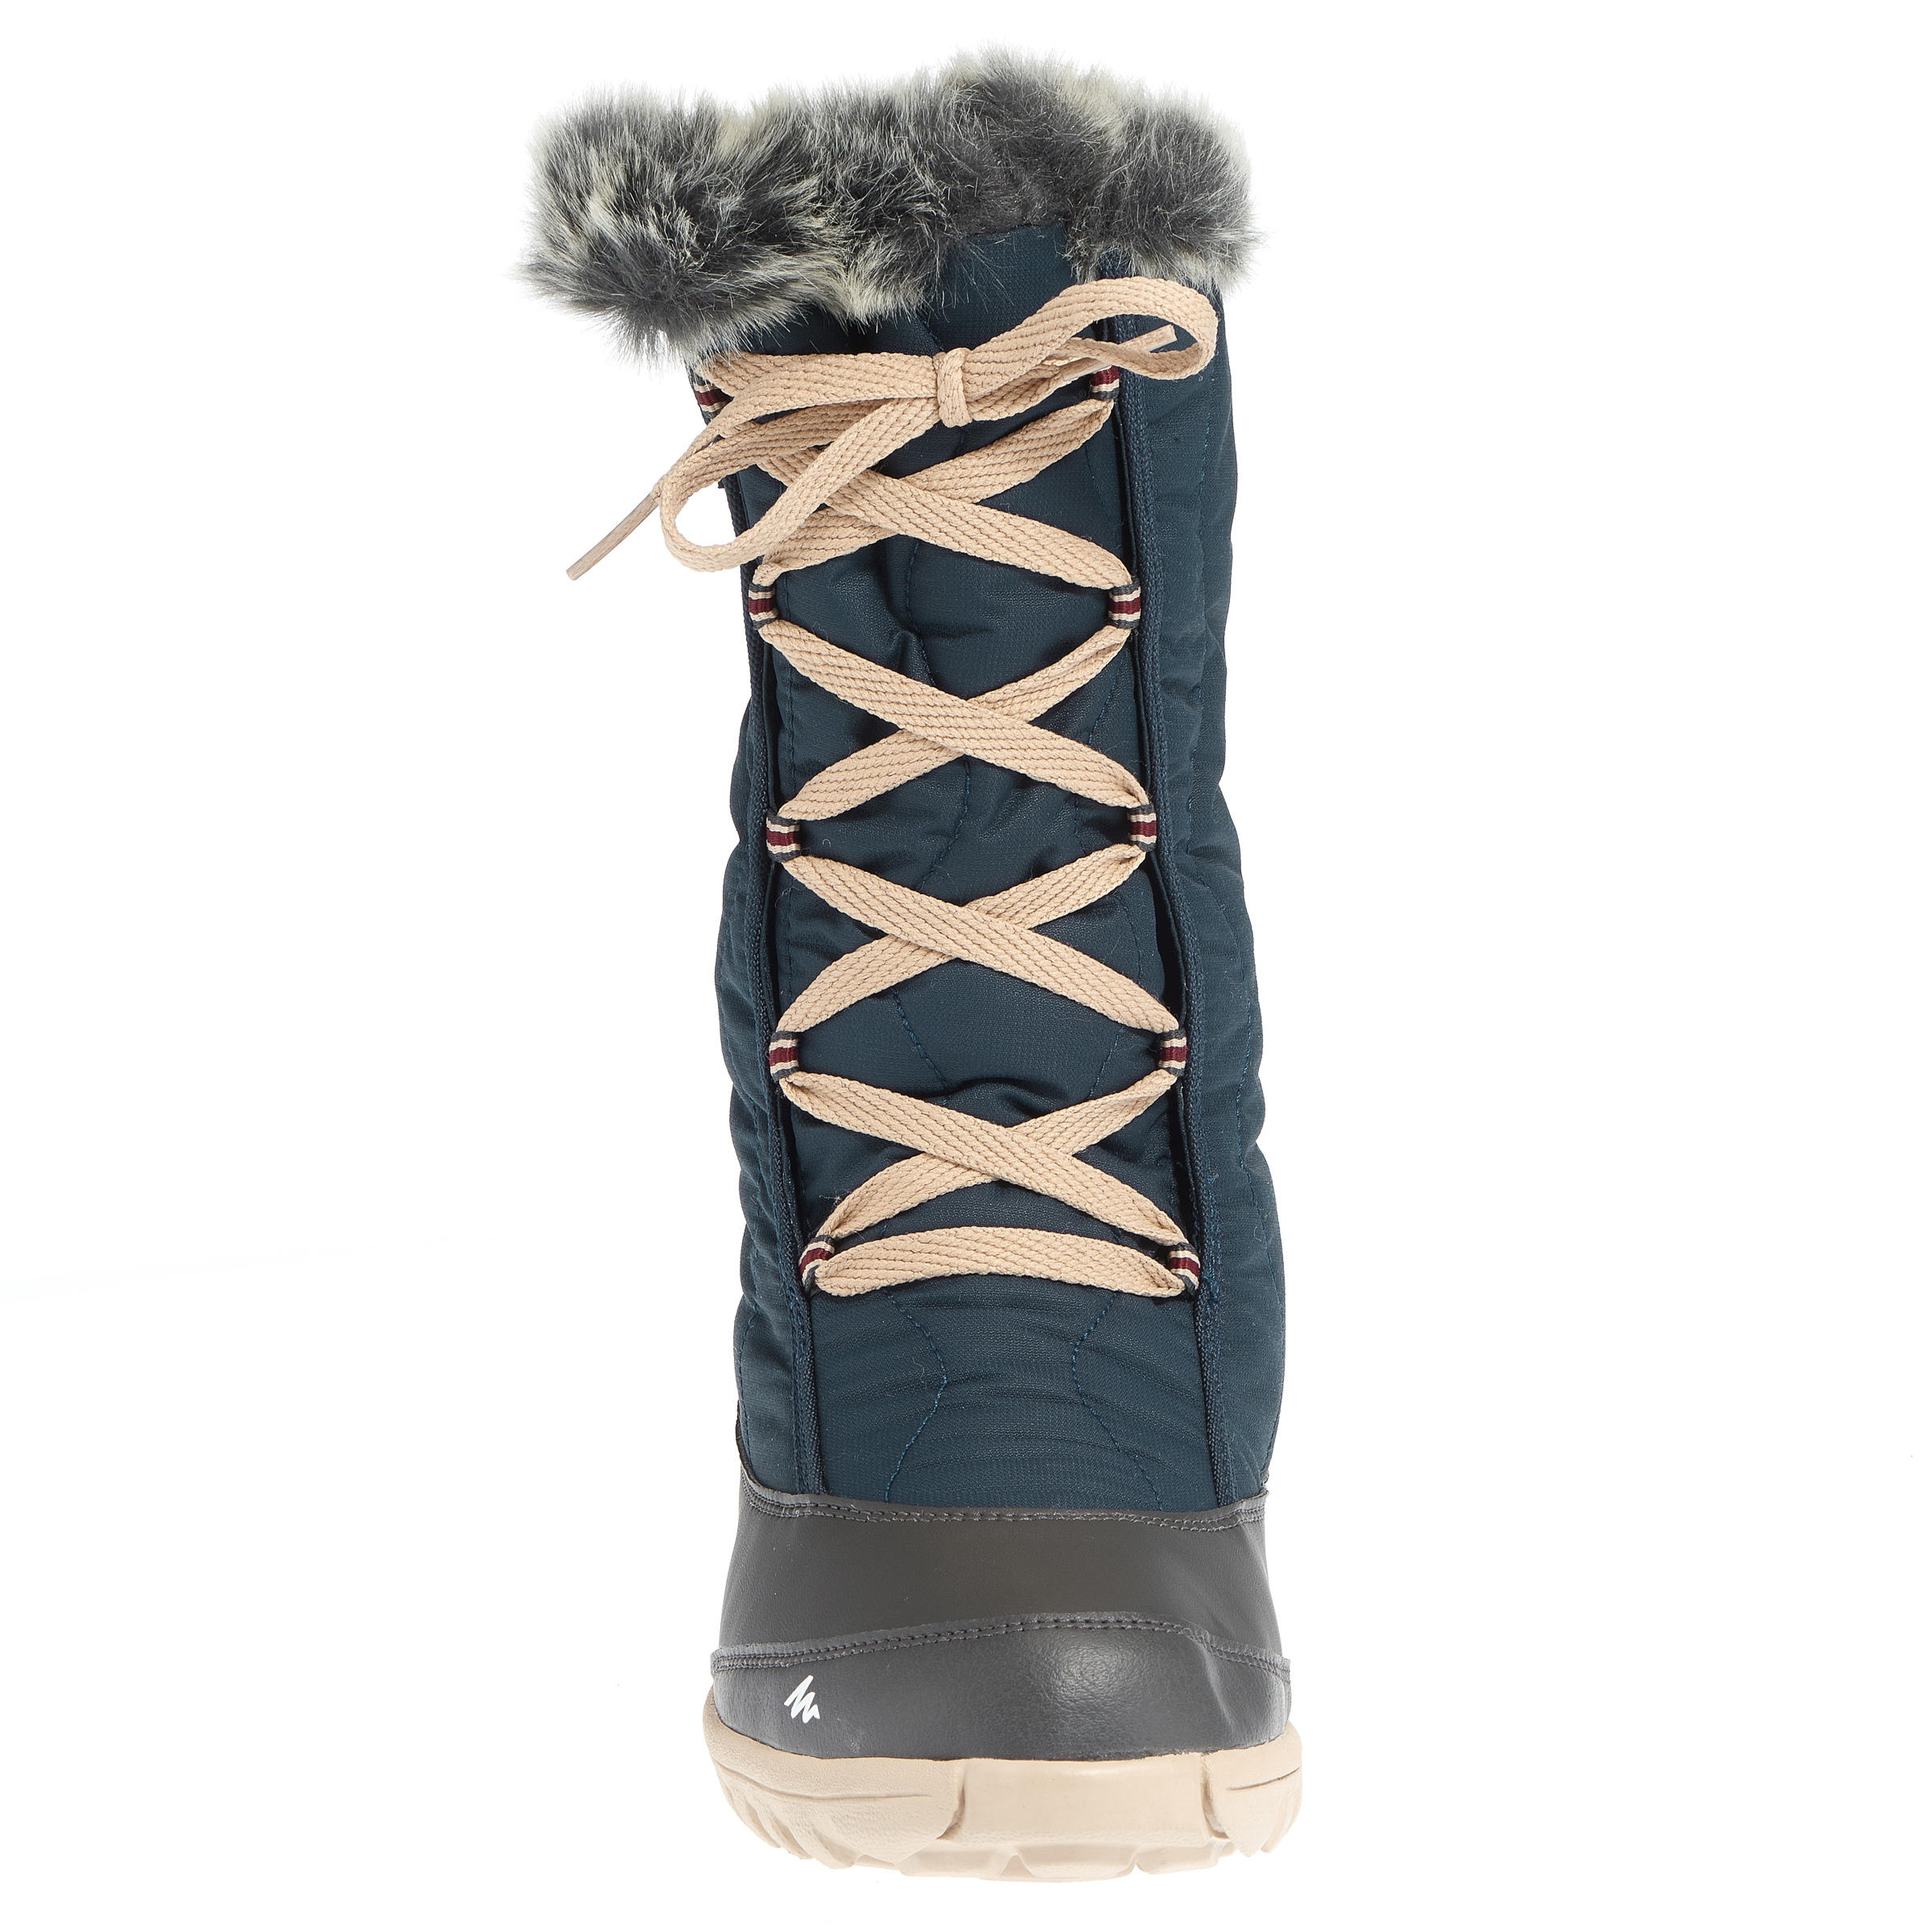 SH500 x-warm blue snow boots with laces 5/13